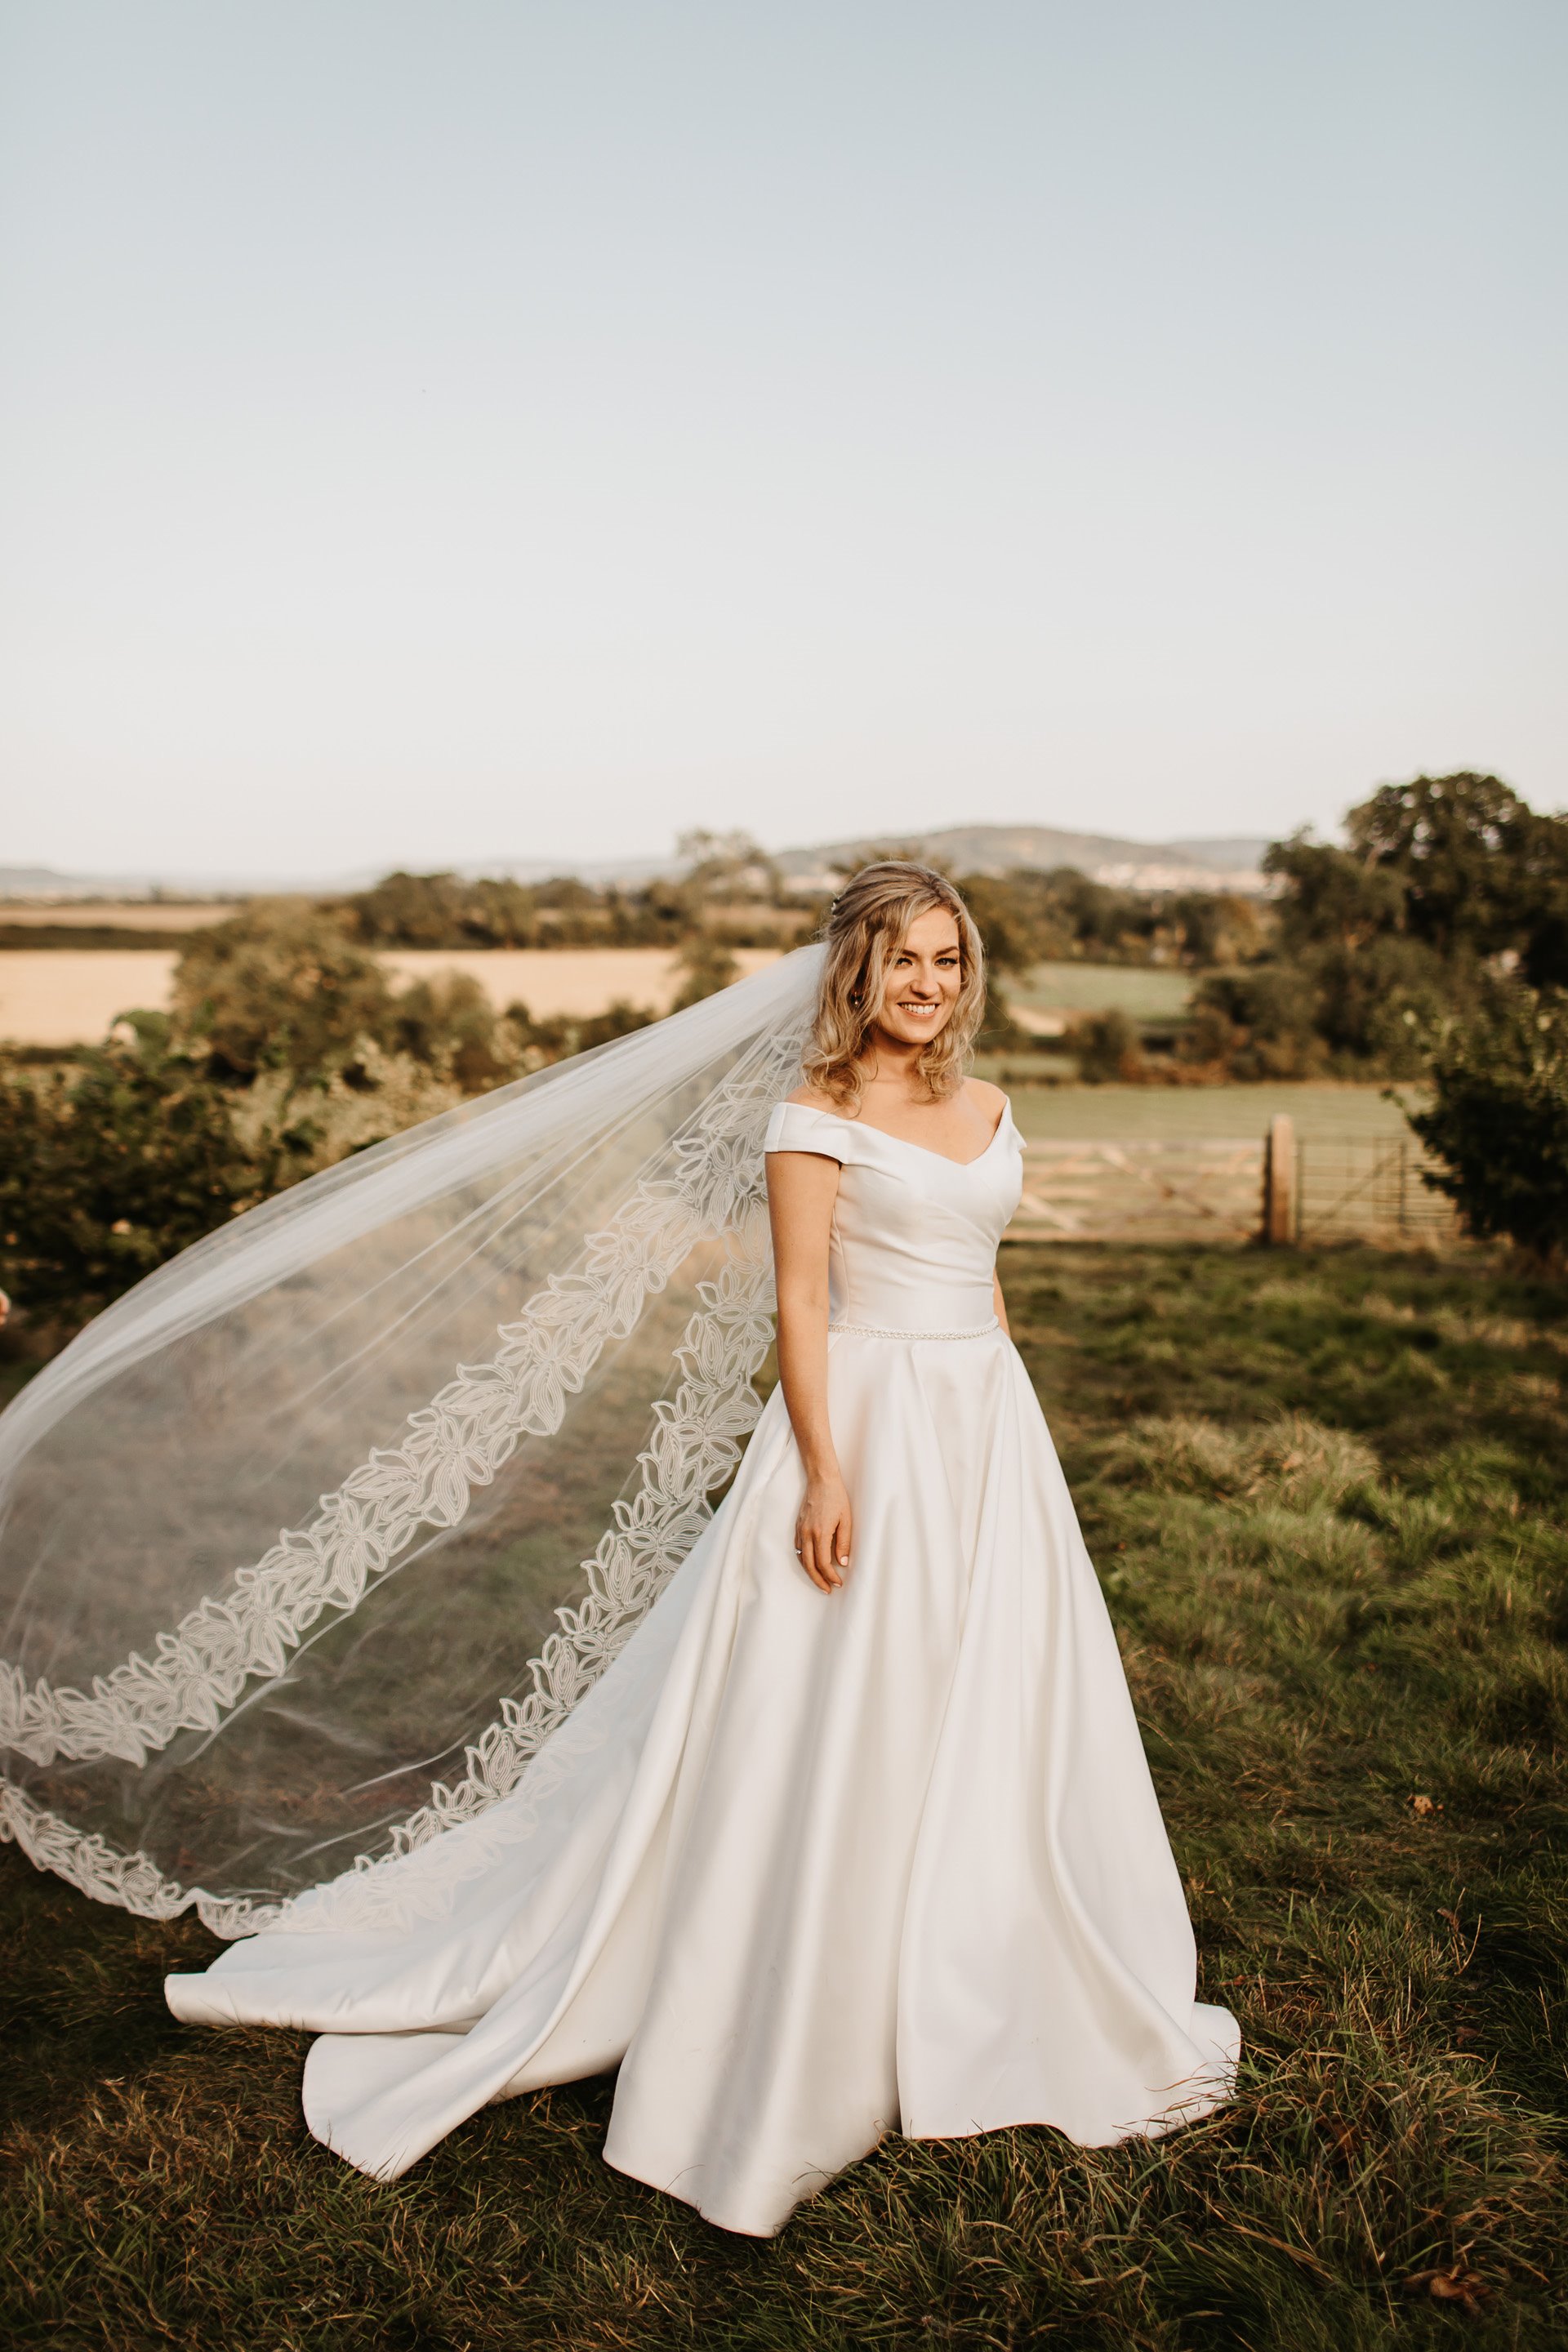 Bride wearing a floor length veil outside in the countryside on her wedding day